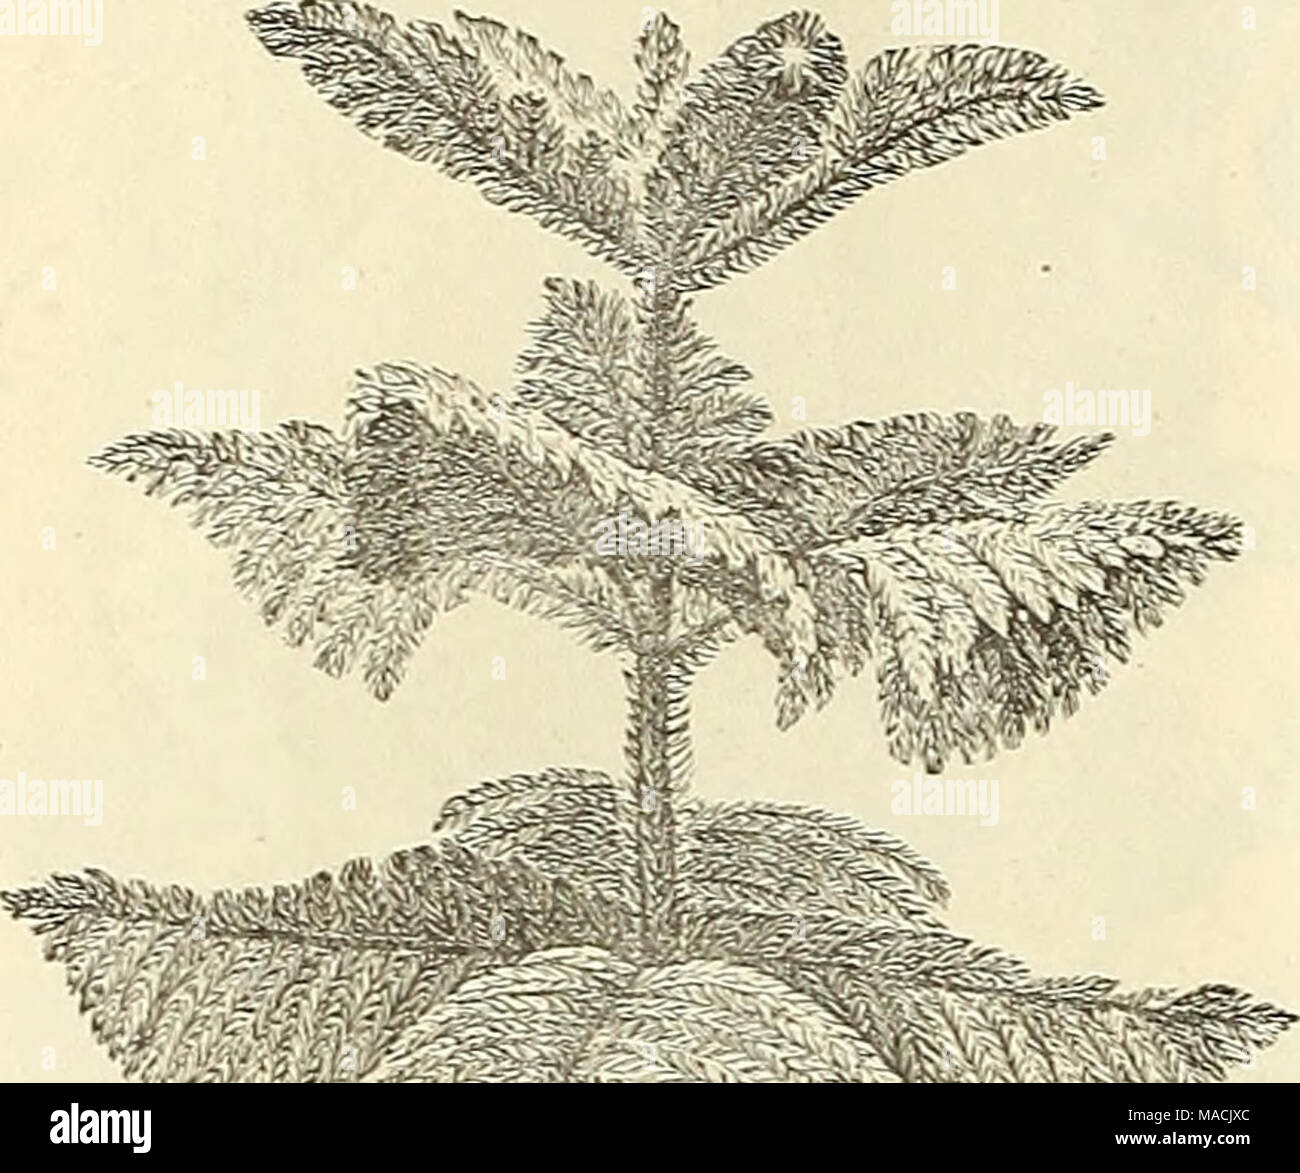 . Dreer's wholesale price list for florists and market gardeners : summer edition July 1891 August . m ,f^M^&quot; Araucaria Excelsa. i Norfolk Island 1'hie.* Elegant specimens of this popular Evergreen, one of the most useful and attractive decorative plants. 21 to 30 inches high, $3.00 each. Anthuriuni Andreanum. Strong 3-inch pots, 50 cents each. Anthuriuni Grande. A most desirable exhibition plant. We offer strong specimens at $1.50, $2.00 and $2.50 each. Anthurium Sherzerianum. 4 inch pots. 81.00 each. Stock Photo